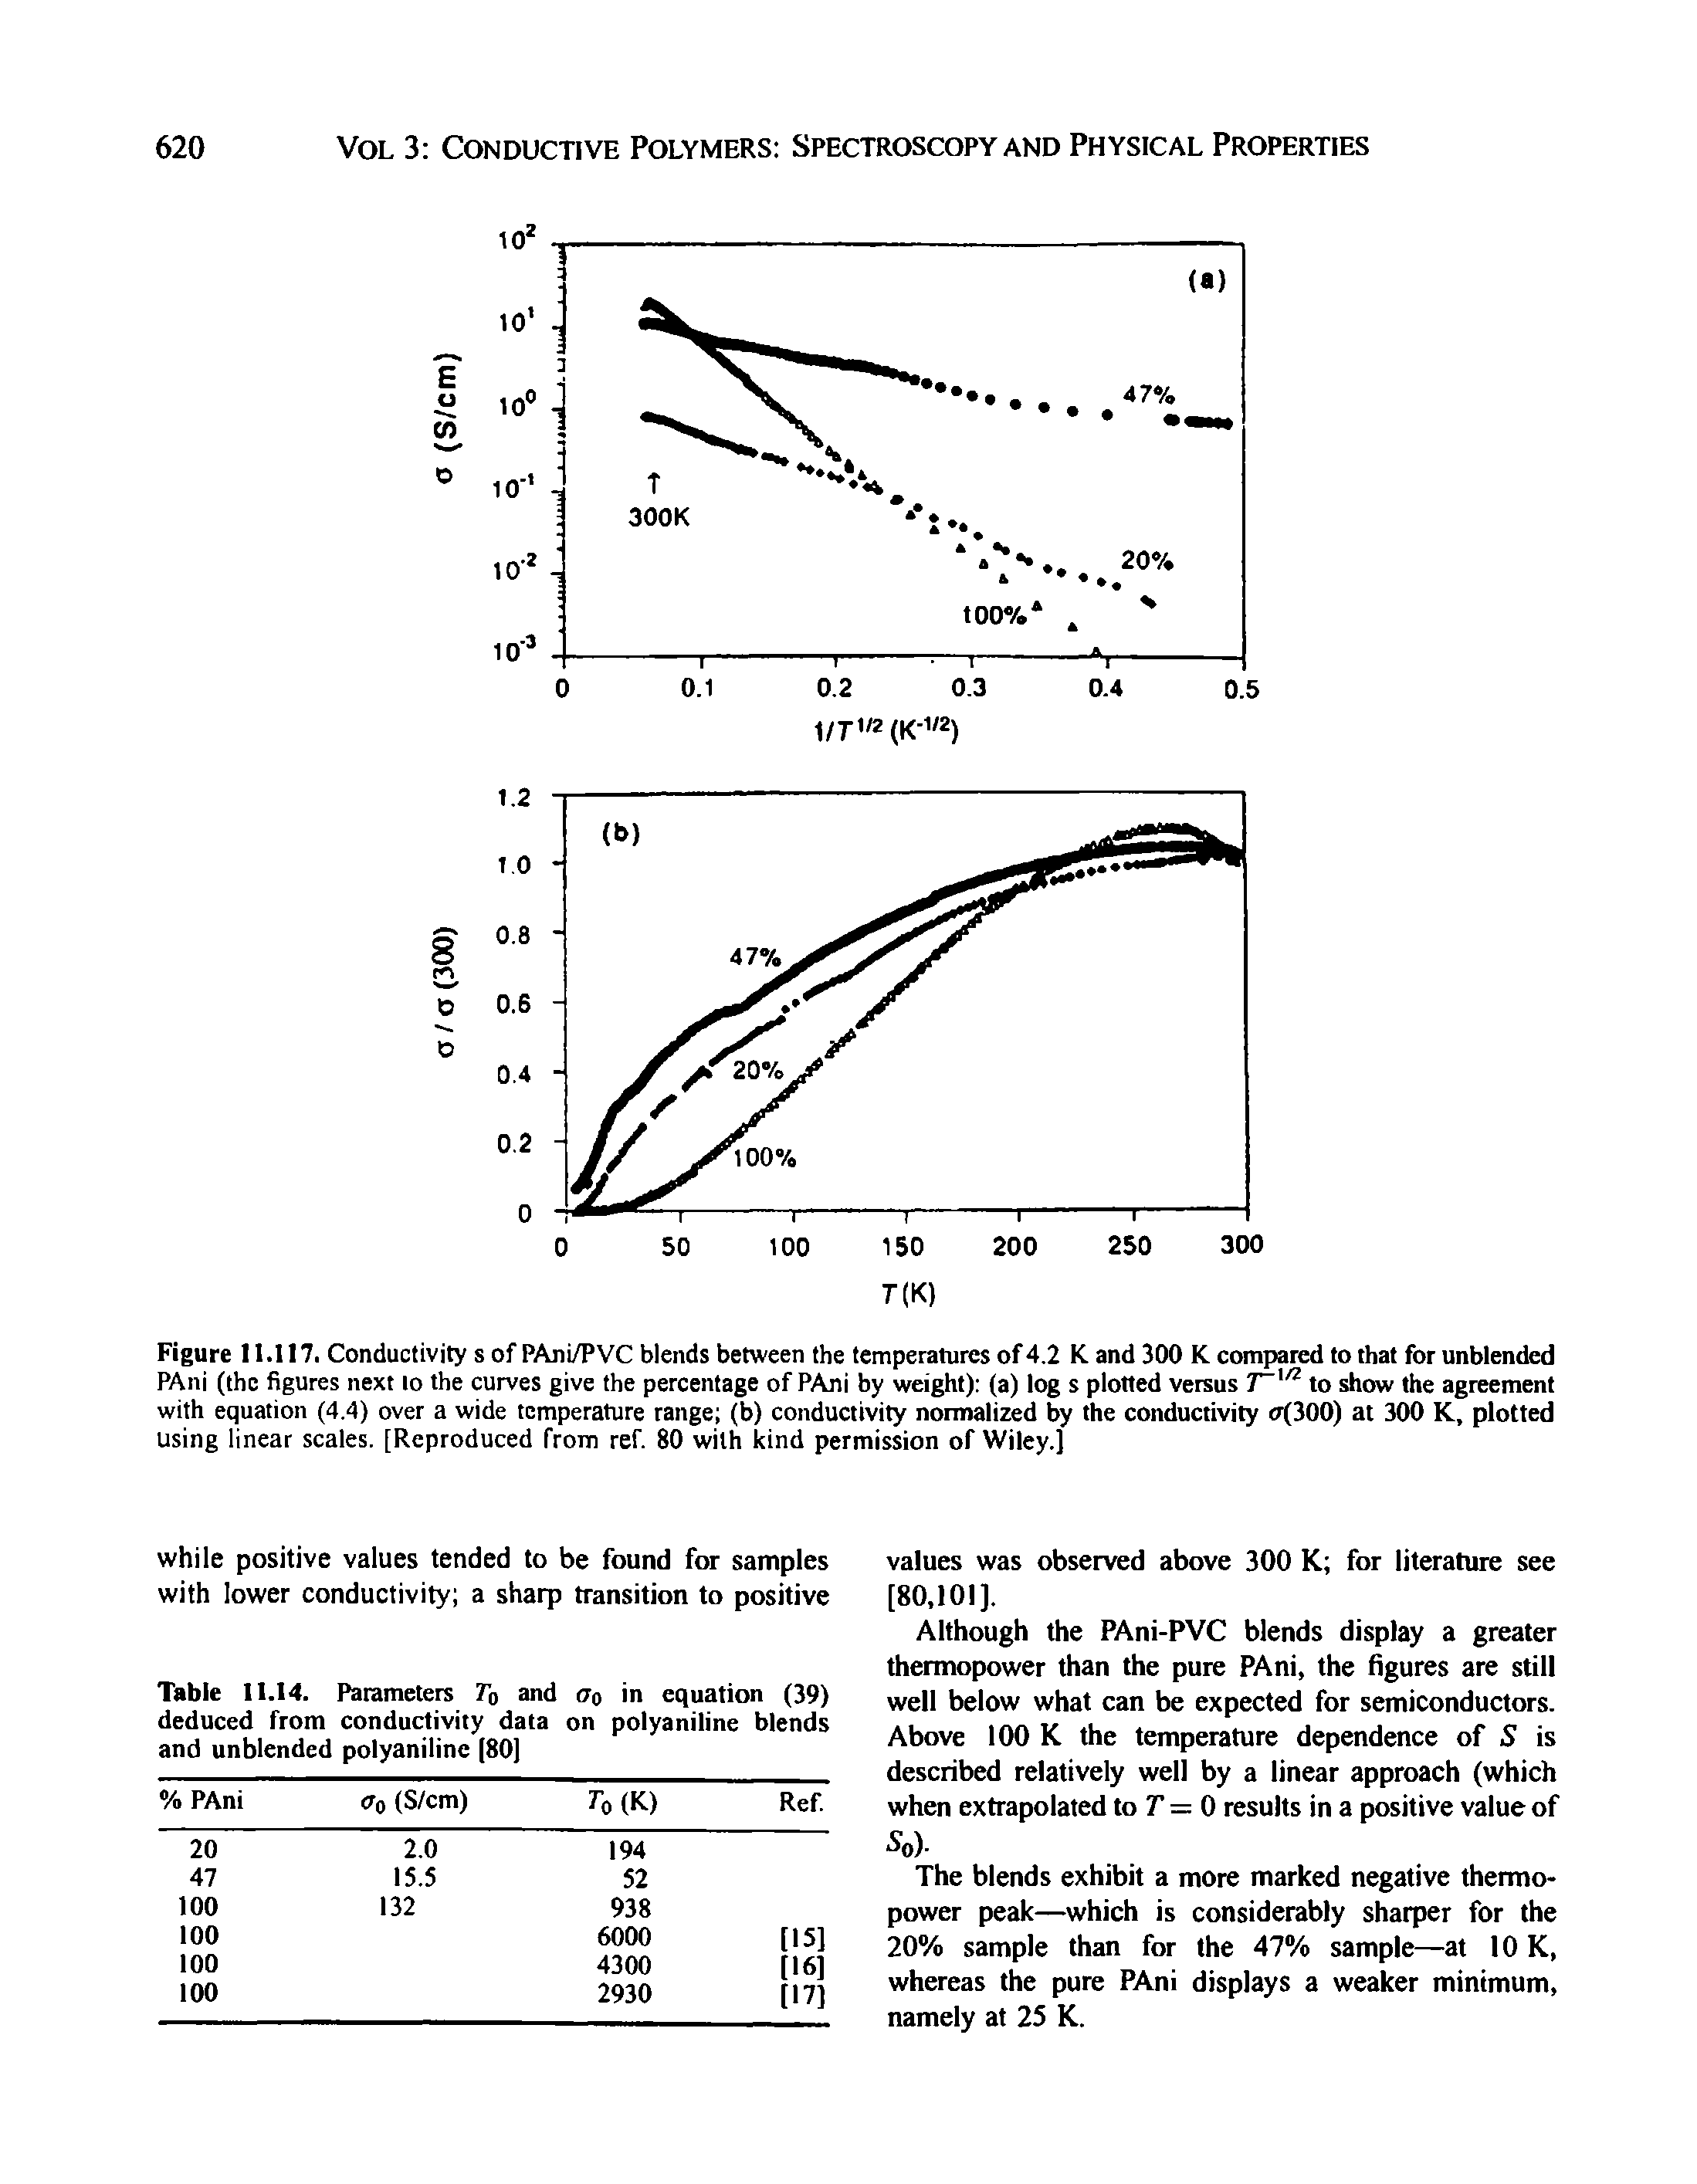 Figure 11.117. Conductivity s of PAni/PVC blends between the temperatures of 4.2 K and 300 K compared to that for unblended PAni (the figures next lo the curves give the percentage of PAni by weight) (a) log s plotted versus to show the agreement with equation (4.4) over a wide temperature range (b) conductivity normalized by the conductivity r(300) at 300 K, plotted using linear scales. [Reproduced from ref. 80 with kind permission of Wiley.]...